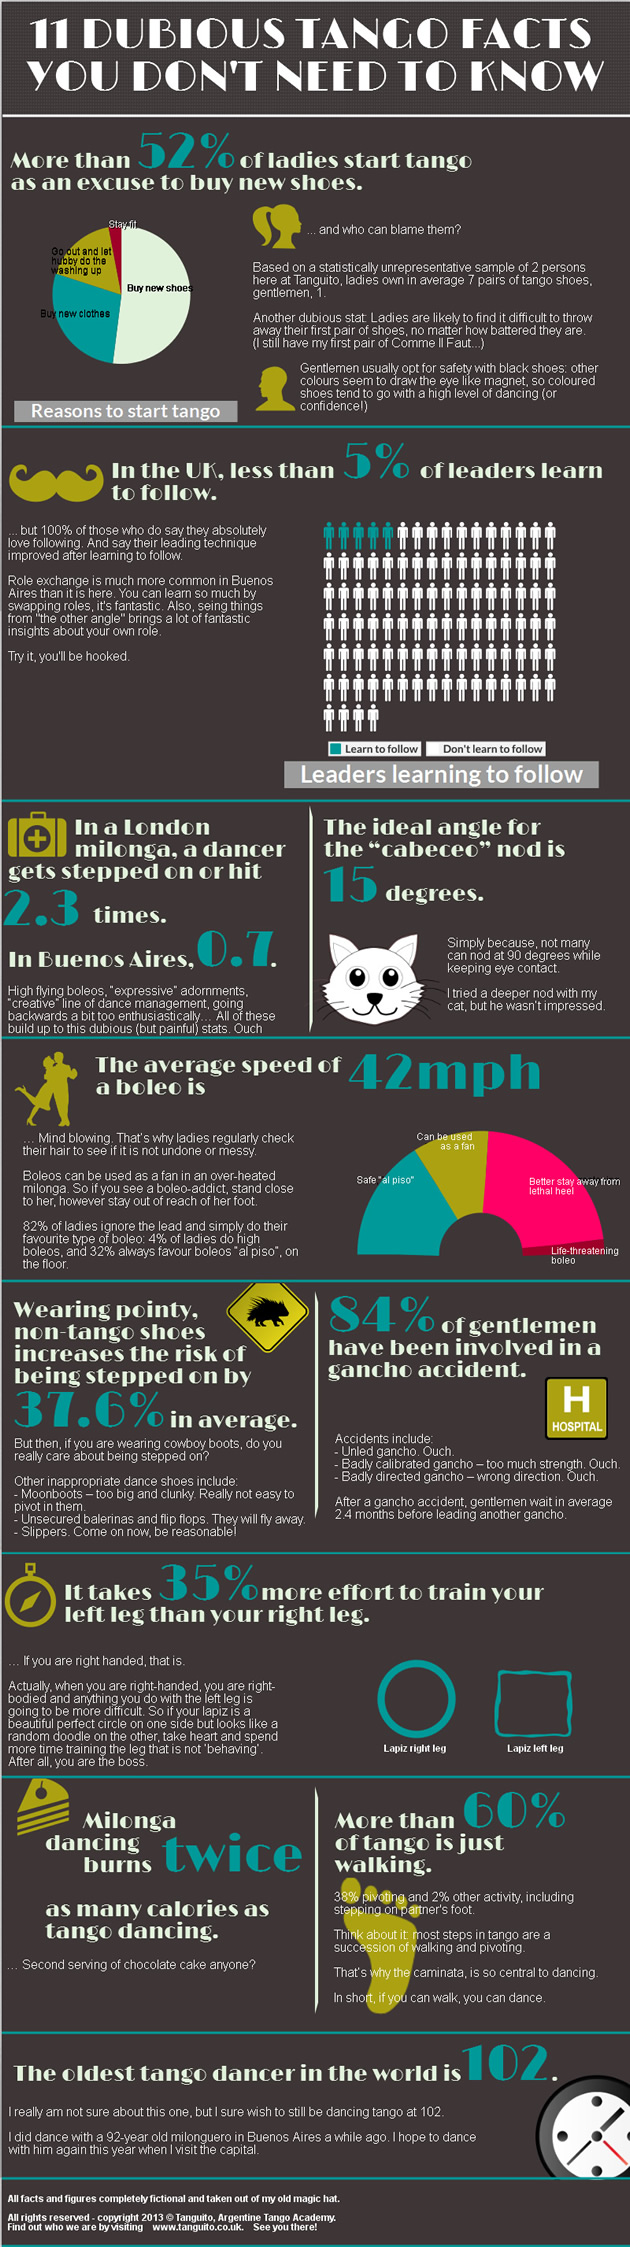 11 dubious tango facts - Infographic